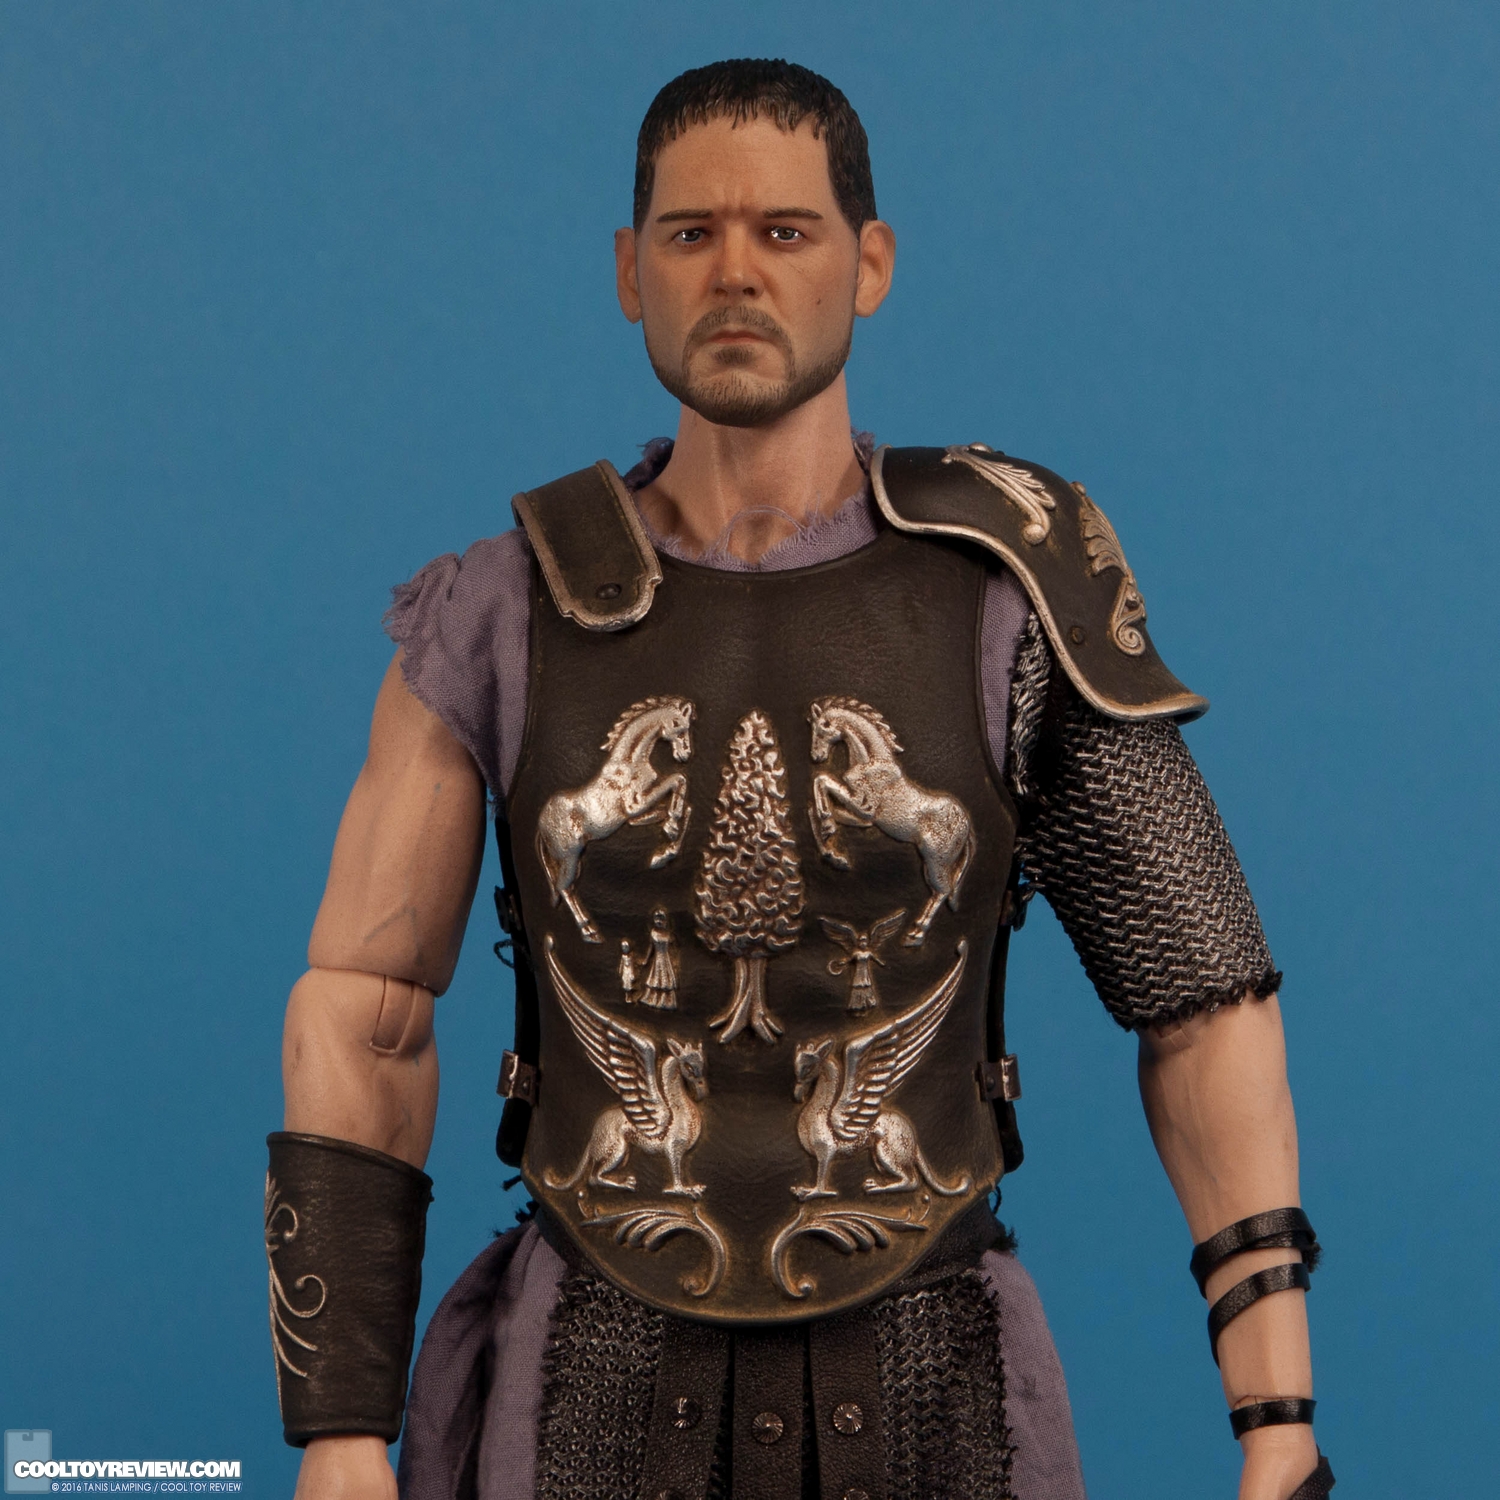 pangaea-toy-gladiator-general-sixth-scale-collectible-figure-005.jpg